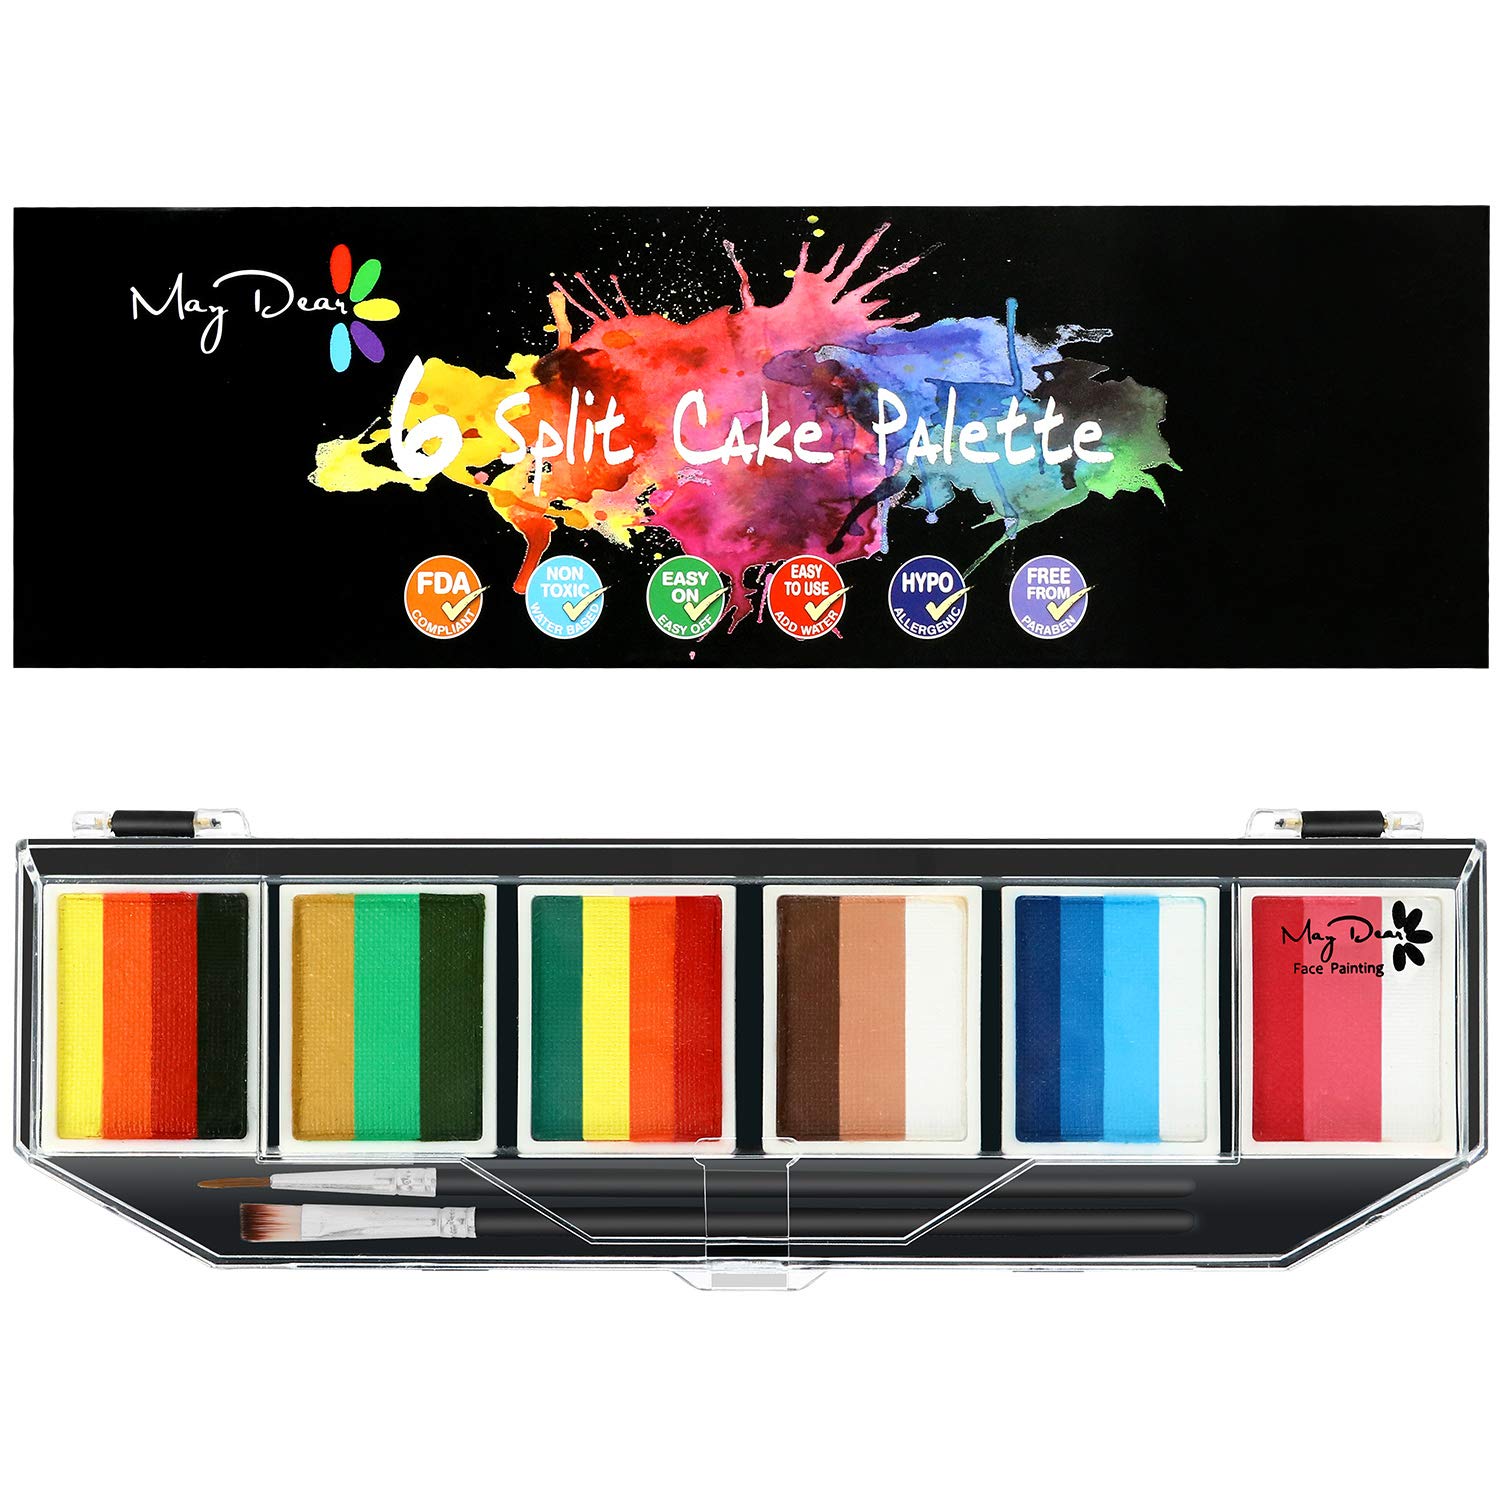 Maydear Face Painting Kit for Kids & Adults with 6 Colors Split